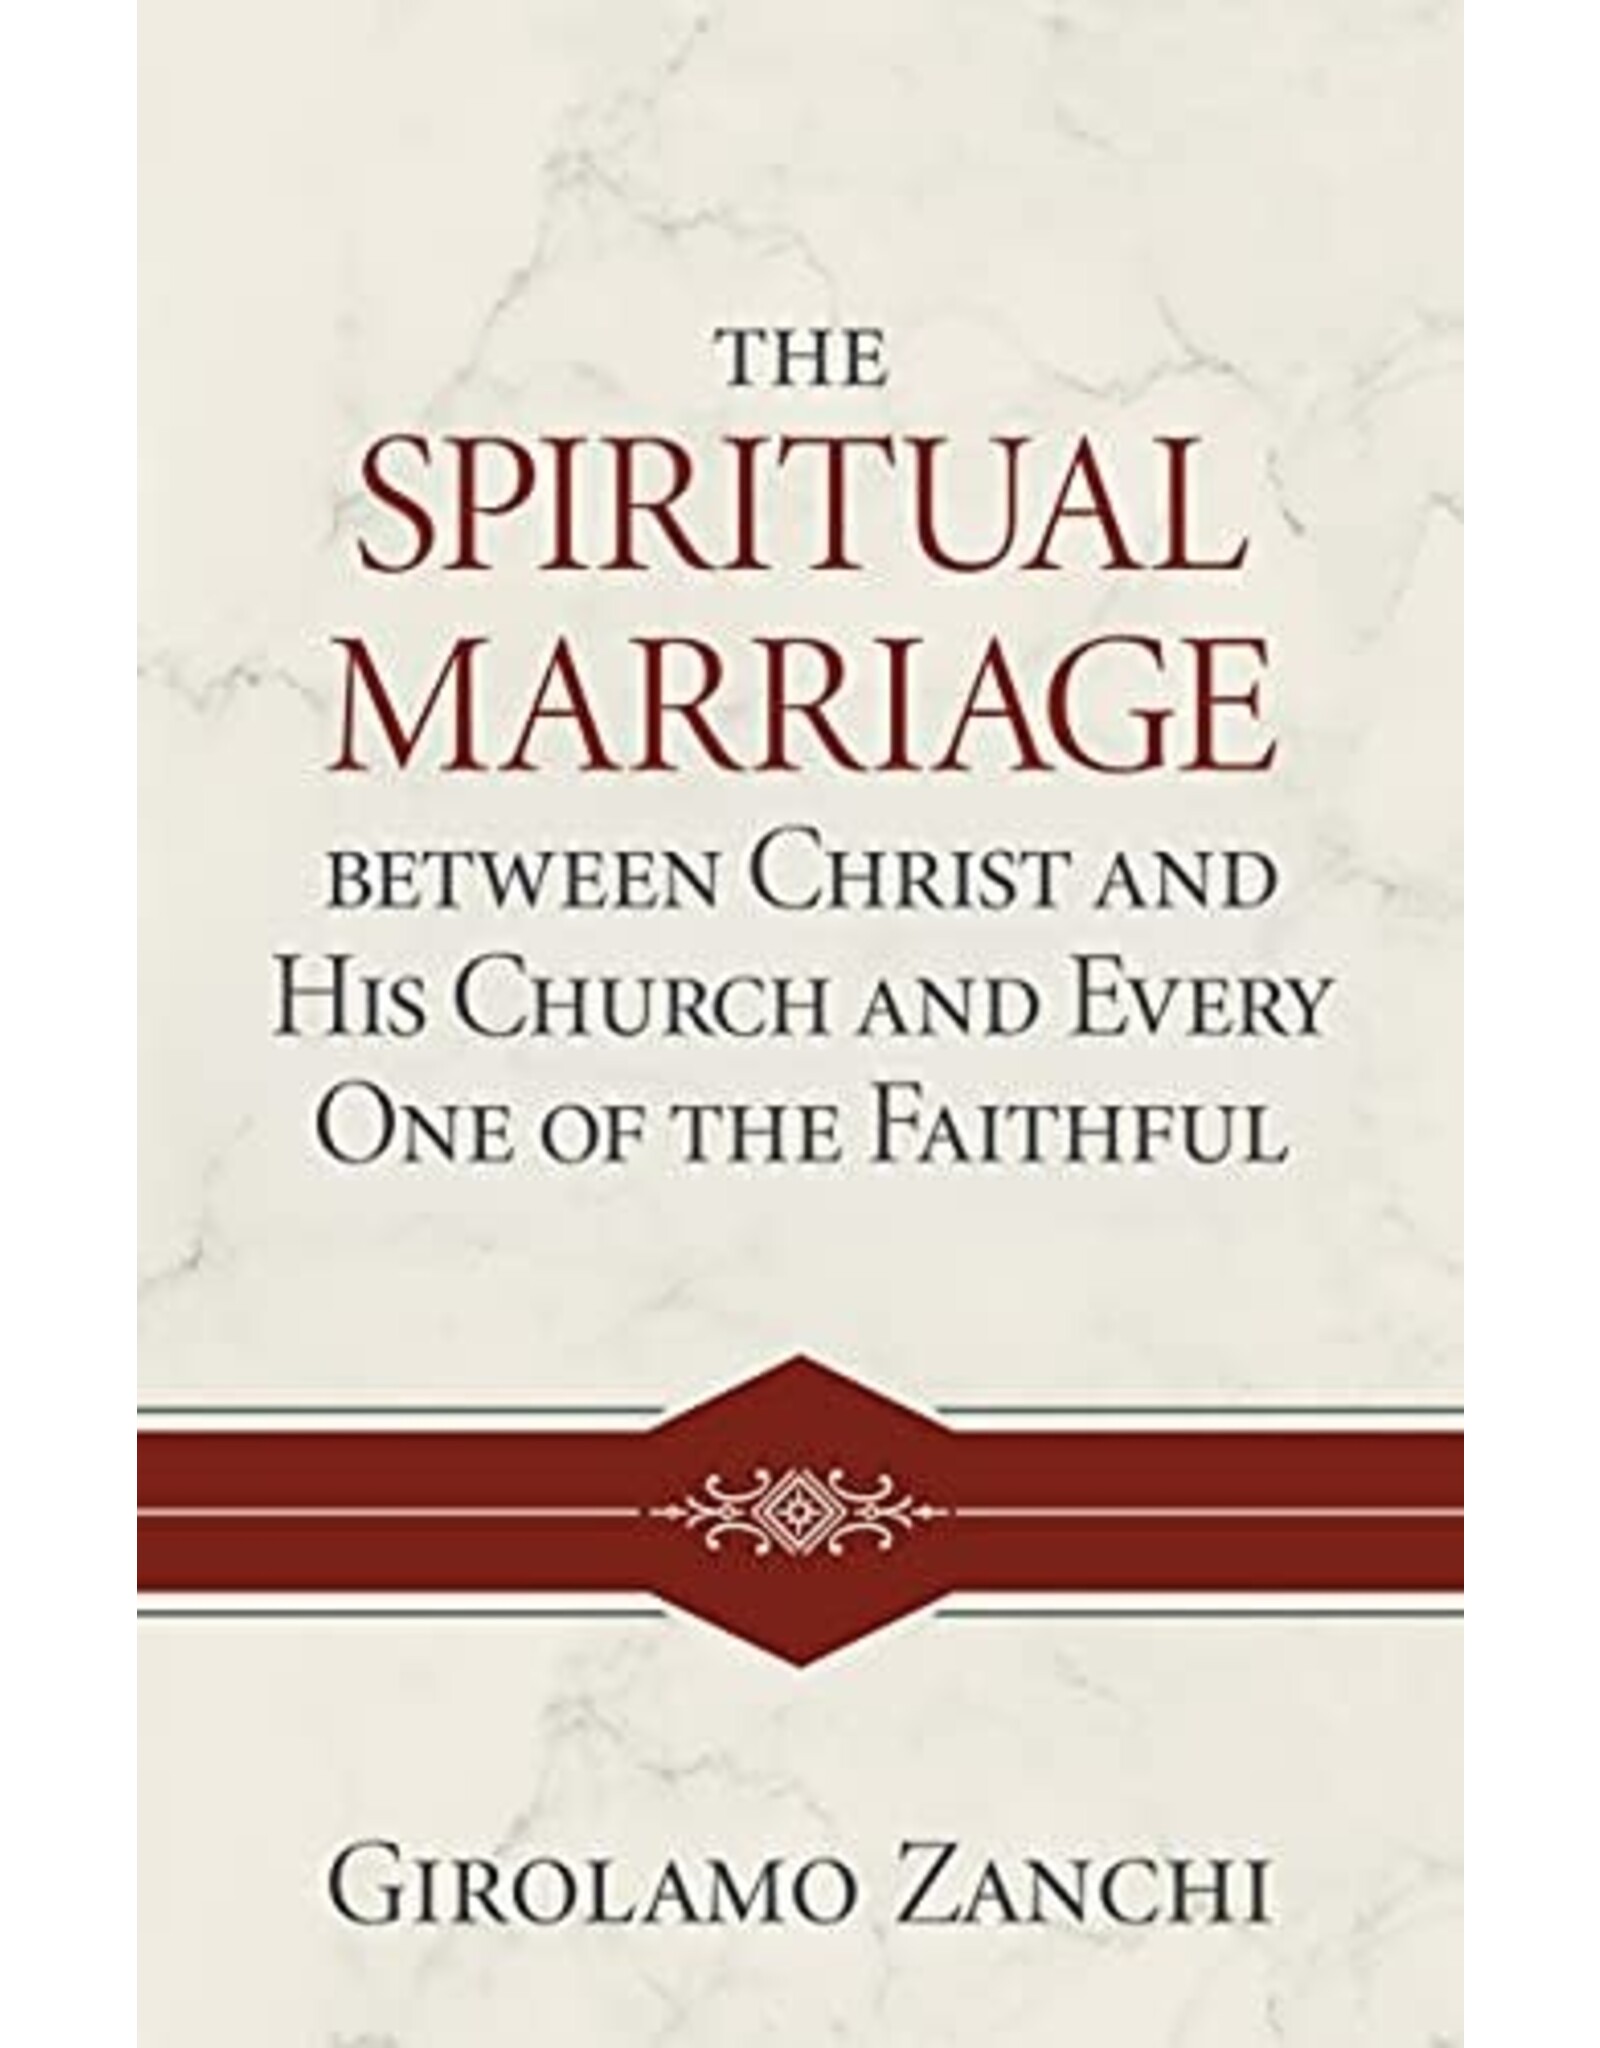 The Spiritual Marriage between Christ and His Church